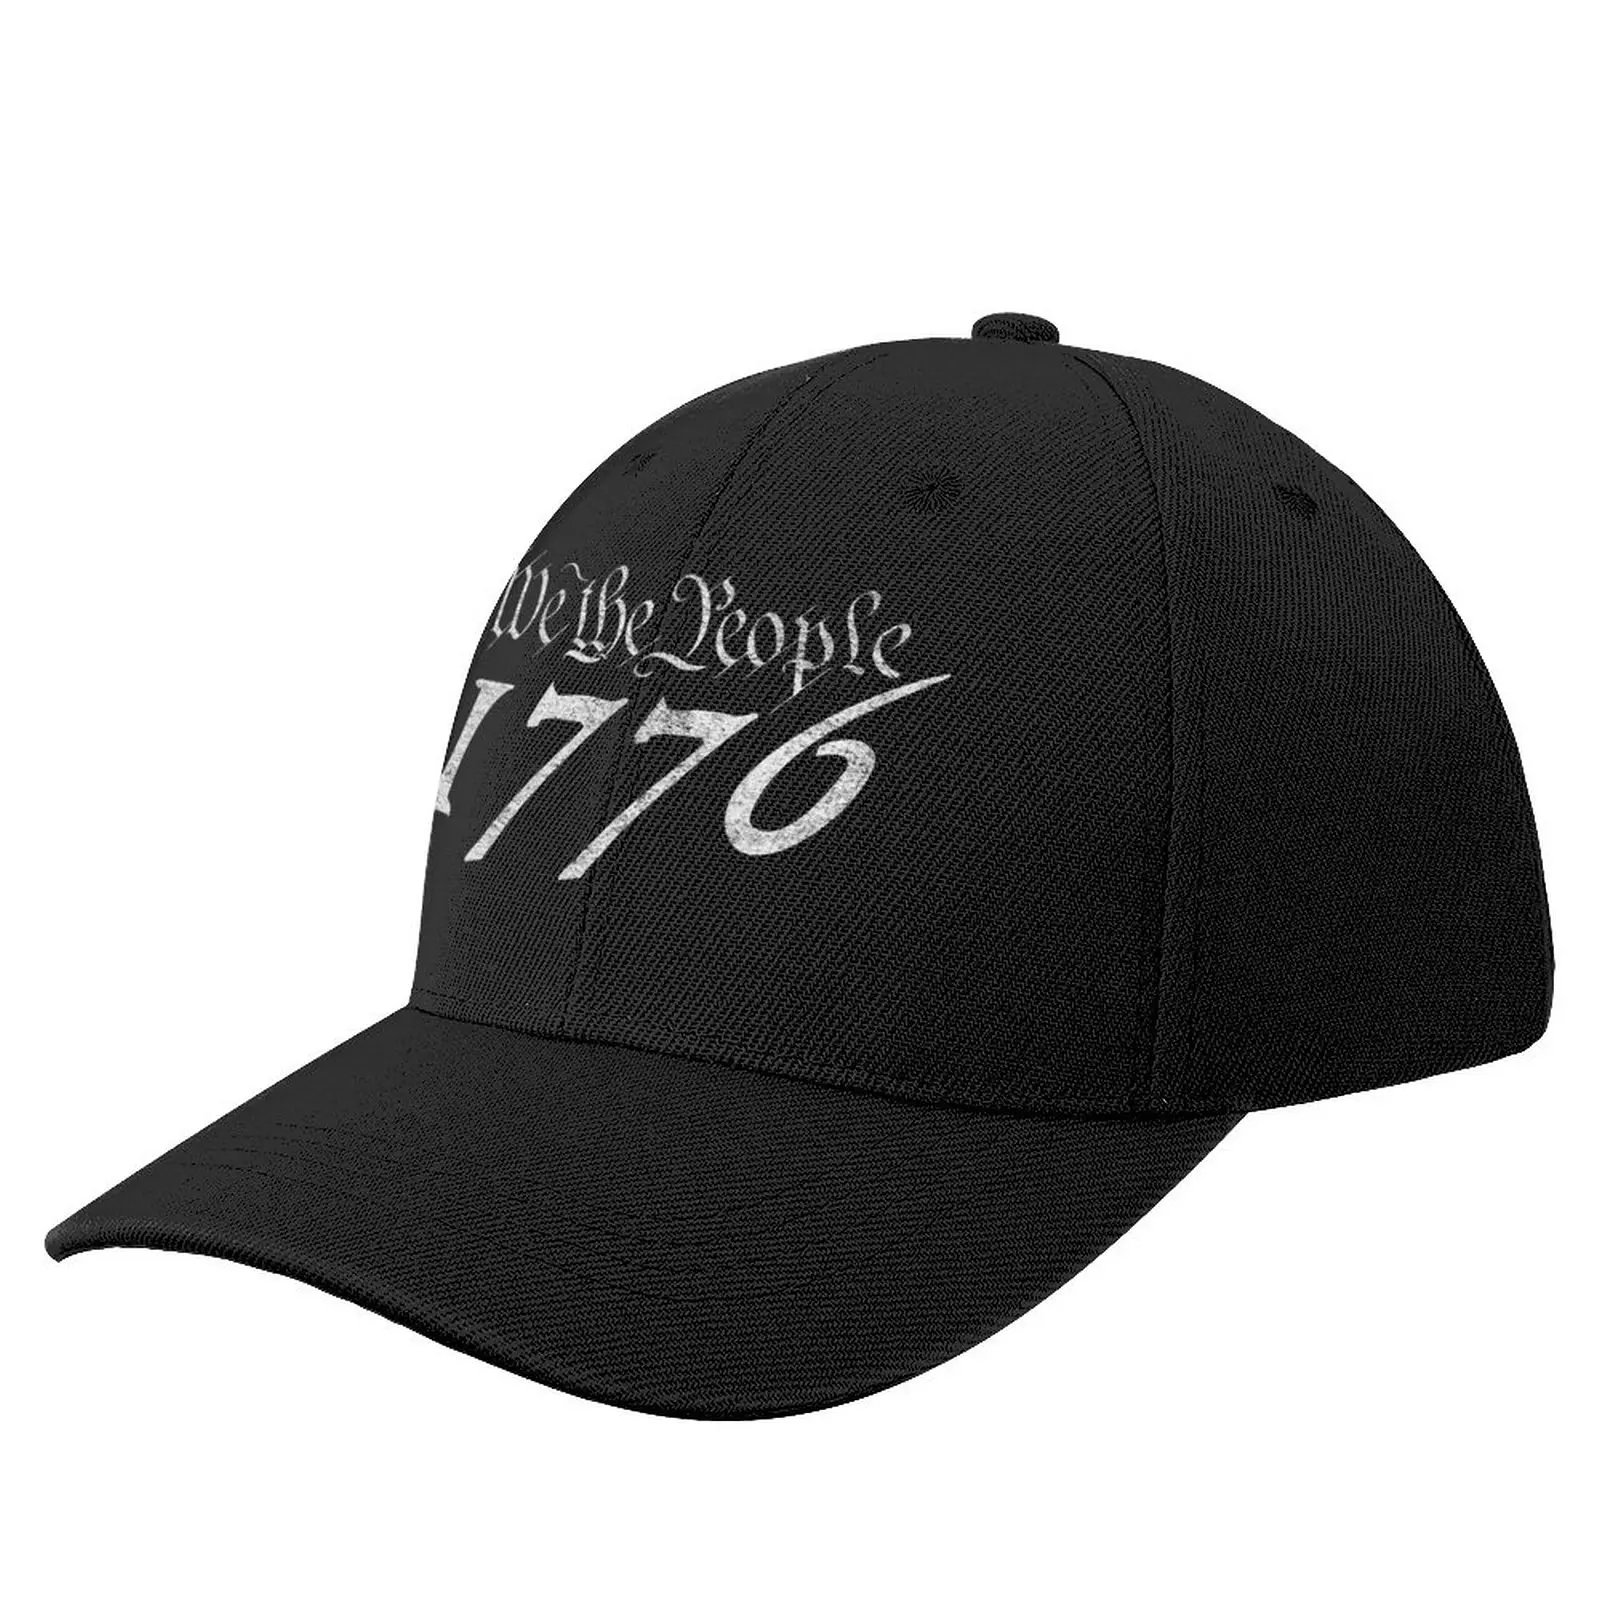 

WE THE PEOPLE 1776 (DISTRESSED WHITE) Baseball Cap Male Golf Hat Hats Woman Men's